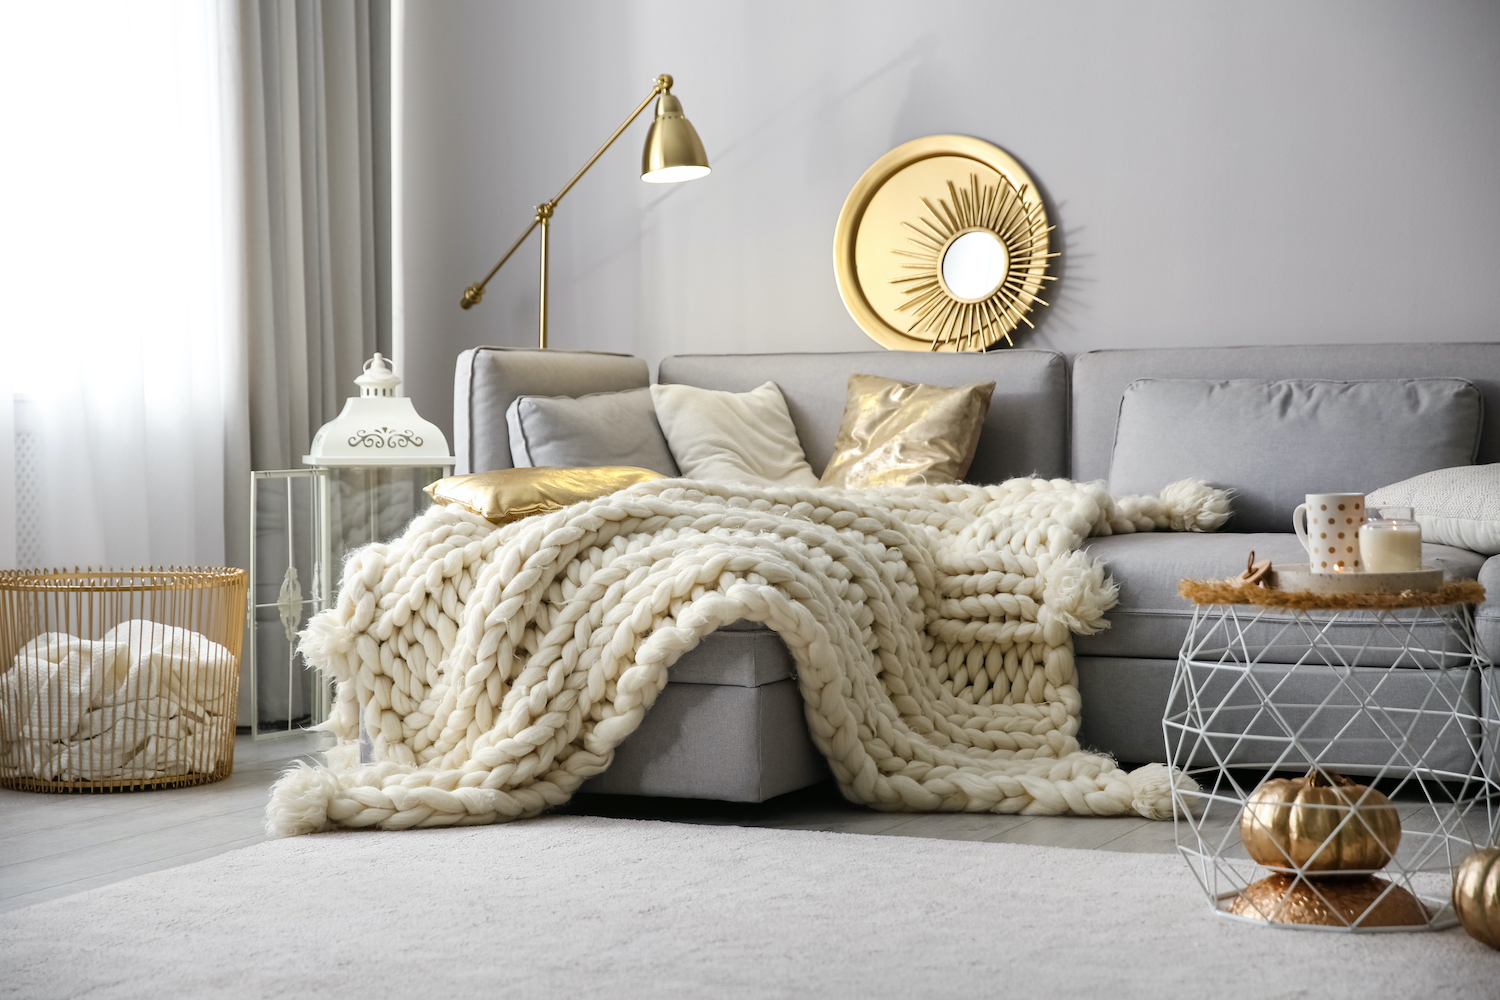 Make your house feel cosy with Cushions on sofa